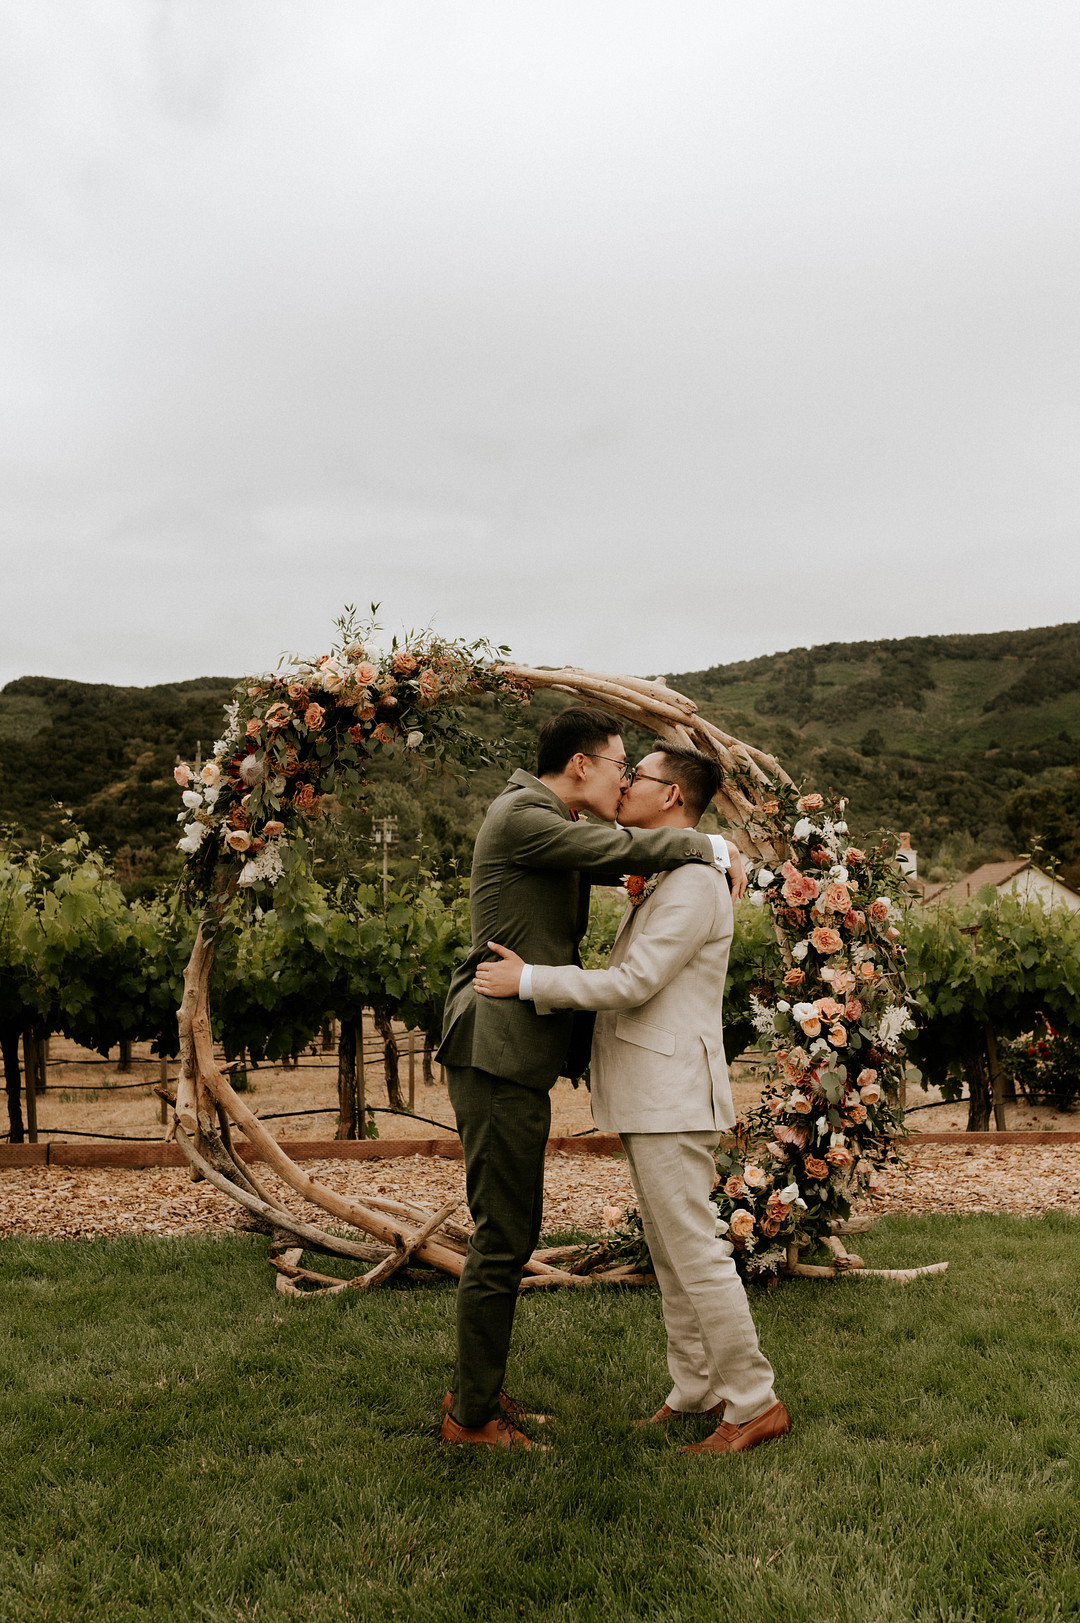 Two Asian grooms kiss in front of their flower backdrop after saying I do. One is wearing an olive green suit and the other man is wearing a cream colored suit. Mountains and a vineyard are in the background. 